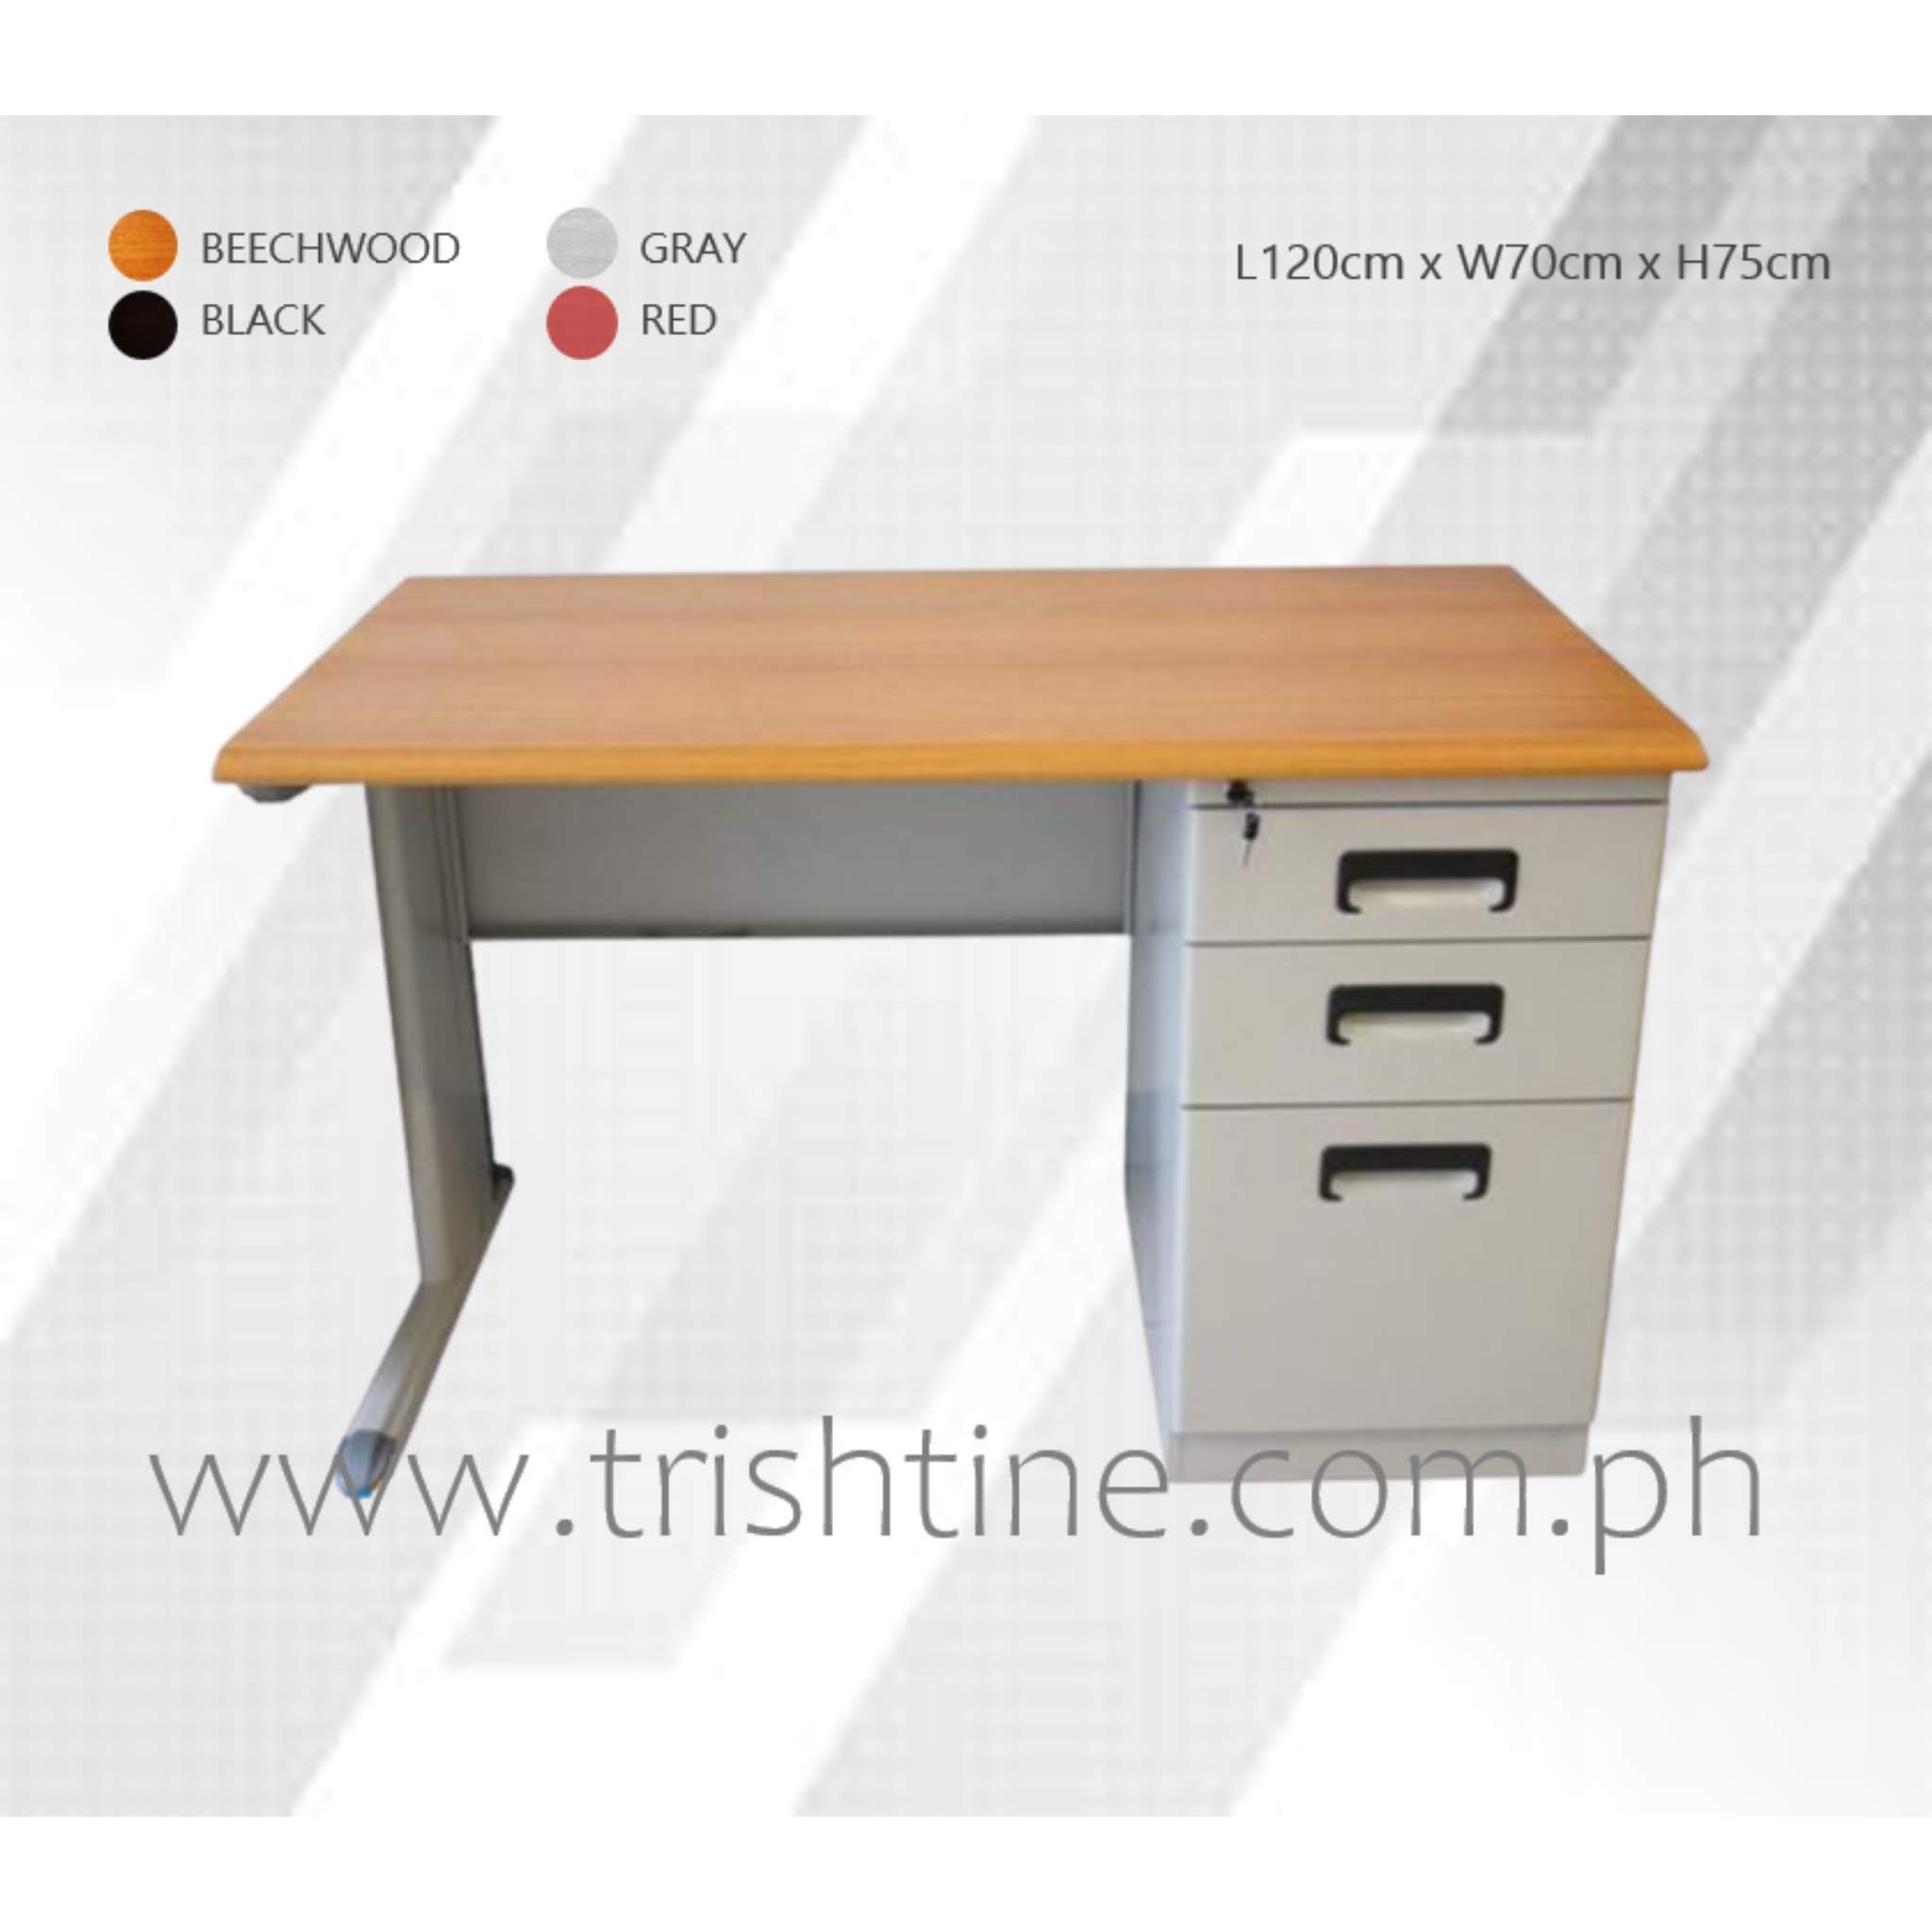 Toff 015 Freestanding Table With Drawers | Trishtine Intended For Freestanding Tables With Drawers (Gallery 2 of 20)